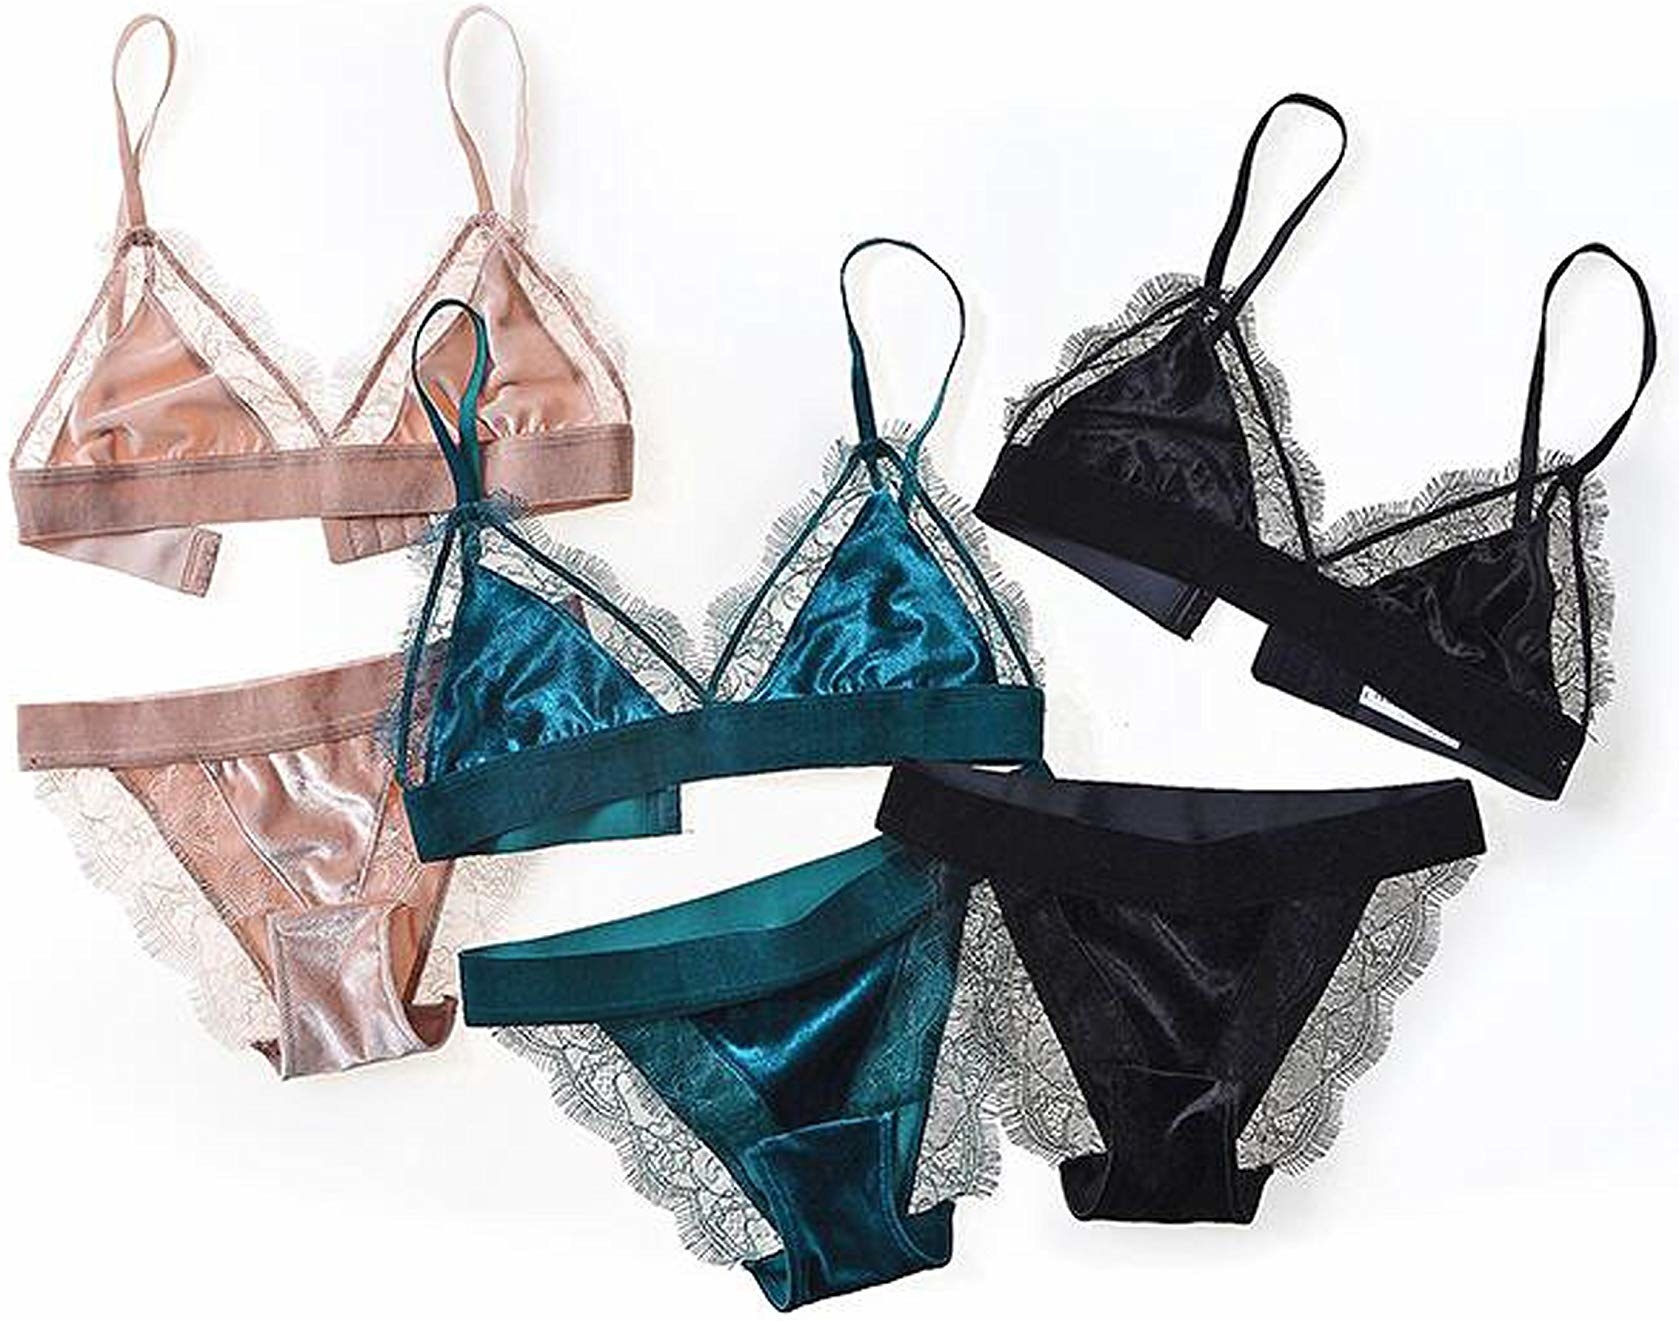 the bra and underwear set in pink, blue, and black